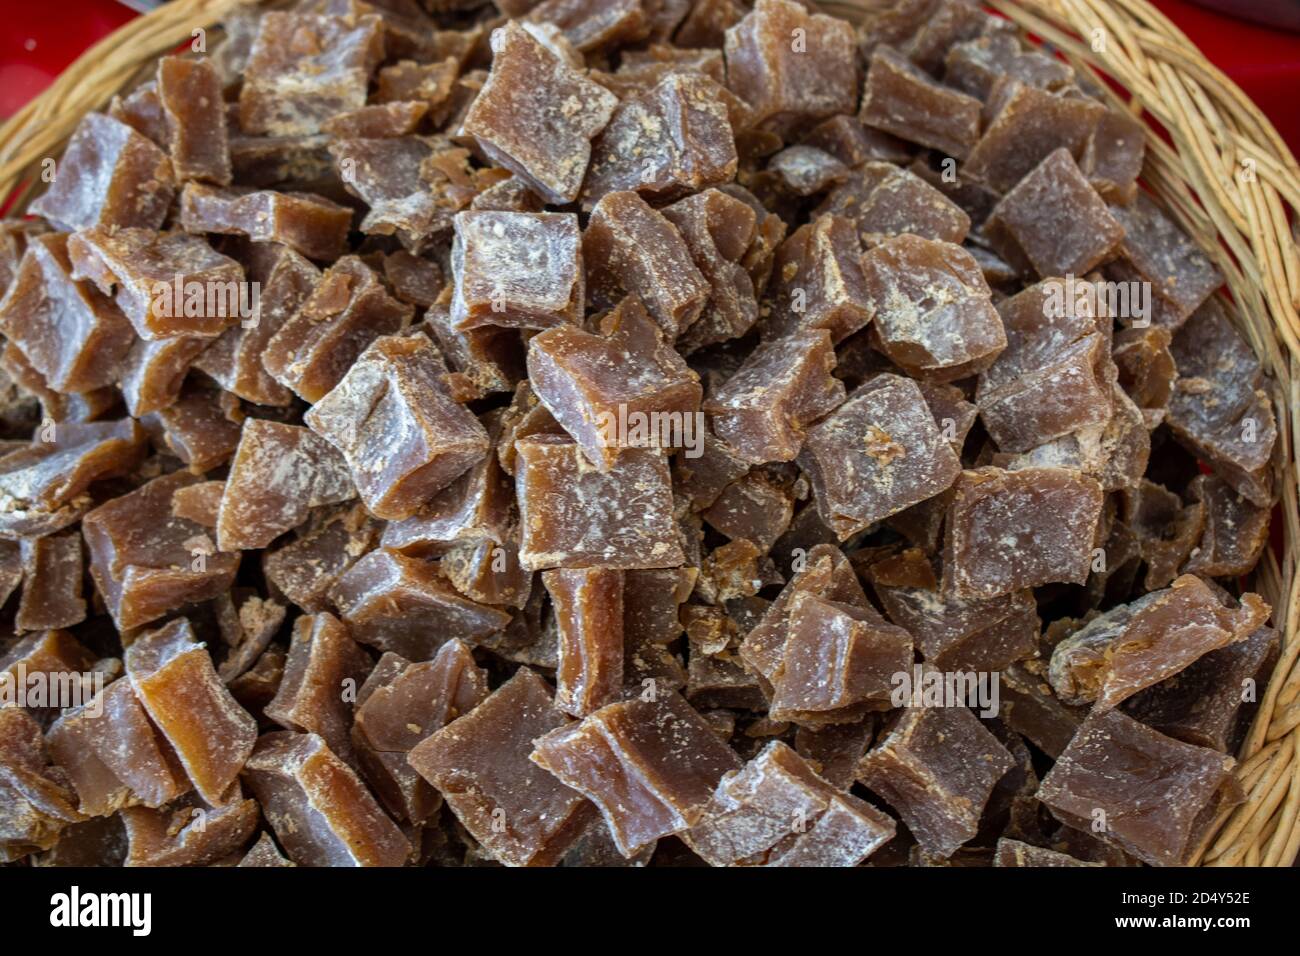 Turkish style dried fruit pulp as snack food Stock Photo